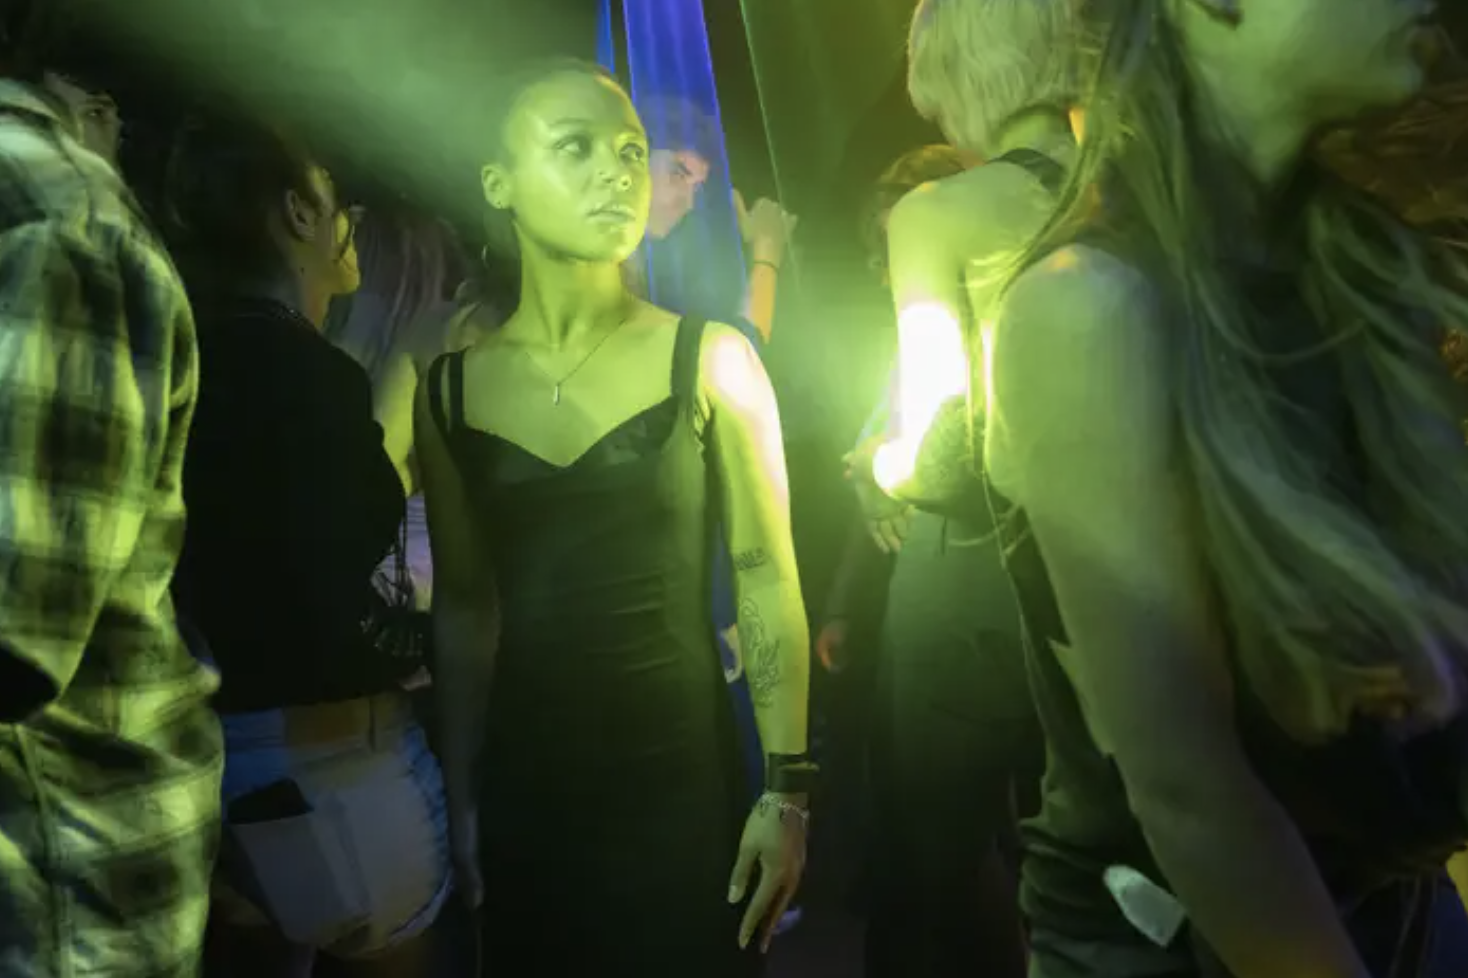 a woman wearing a black dress stands in a crowded club bathed in green light